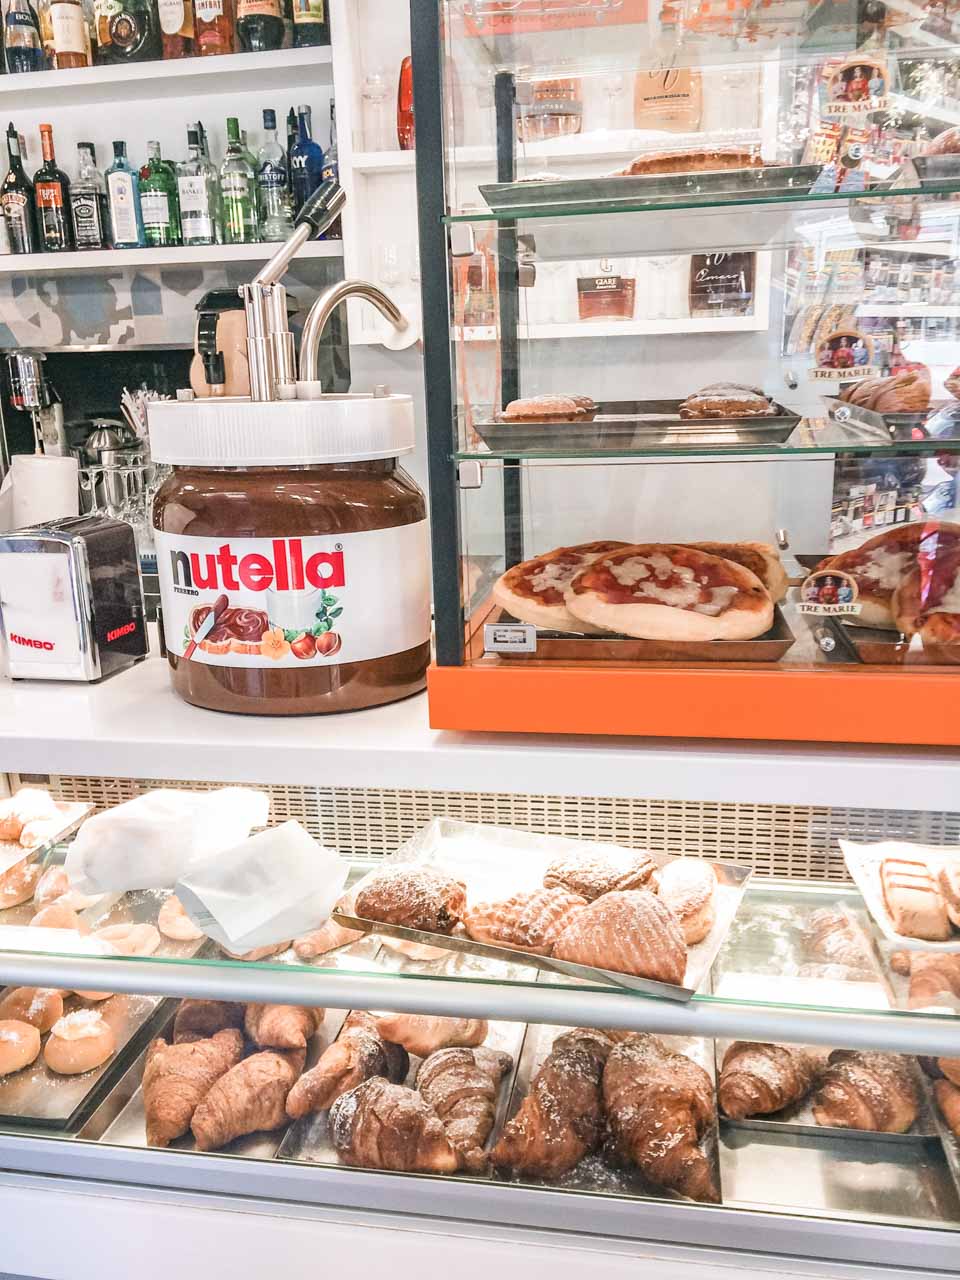 Pastries and a massive jar of Nutella on display inside Marittimo Bar Tobacco and Coffee in Salerno